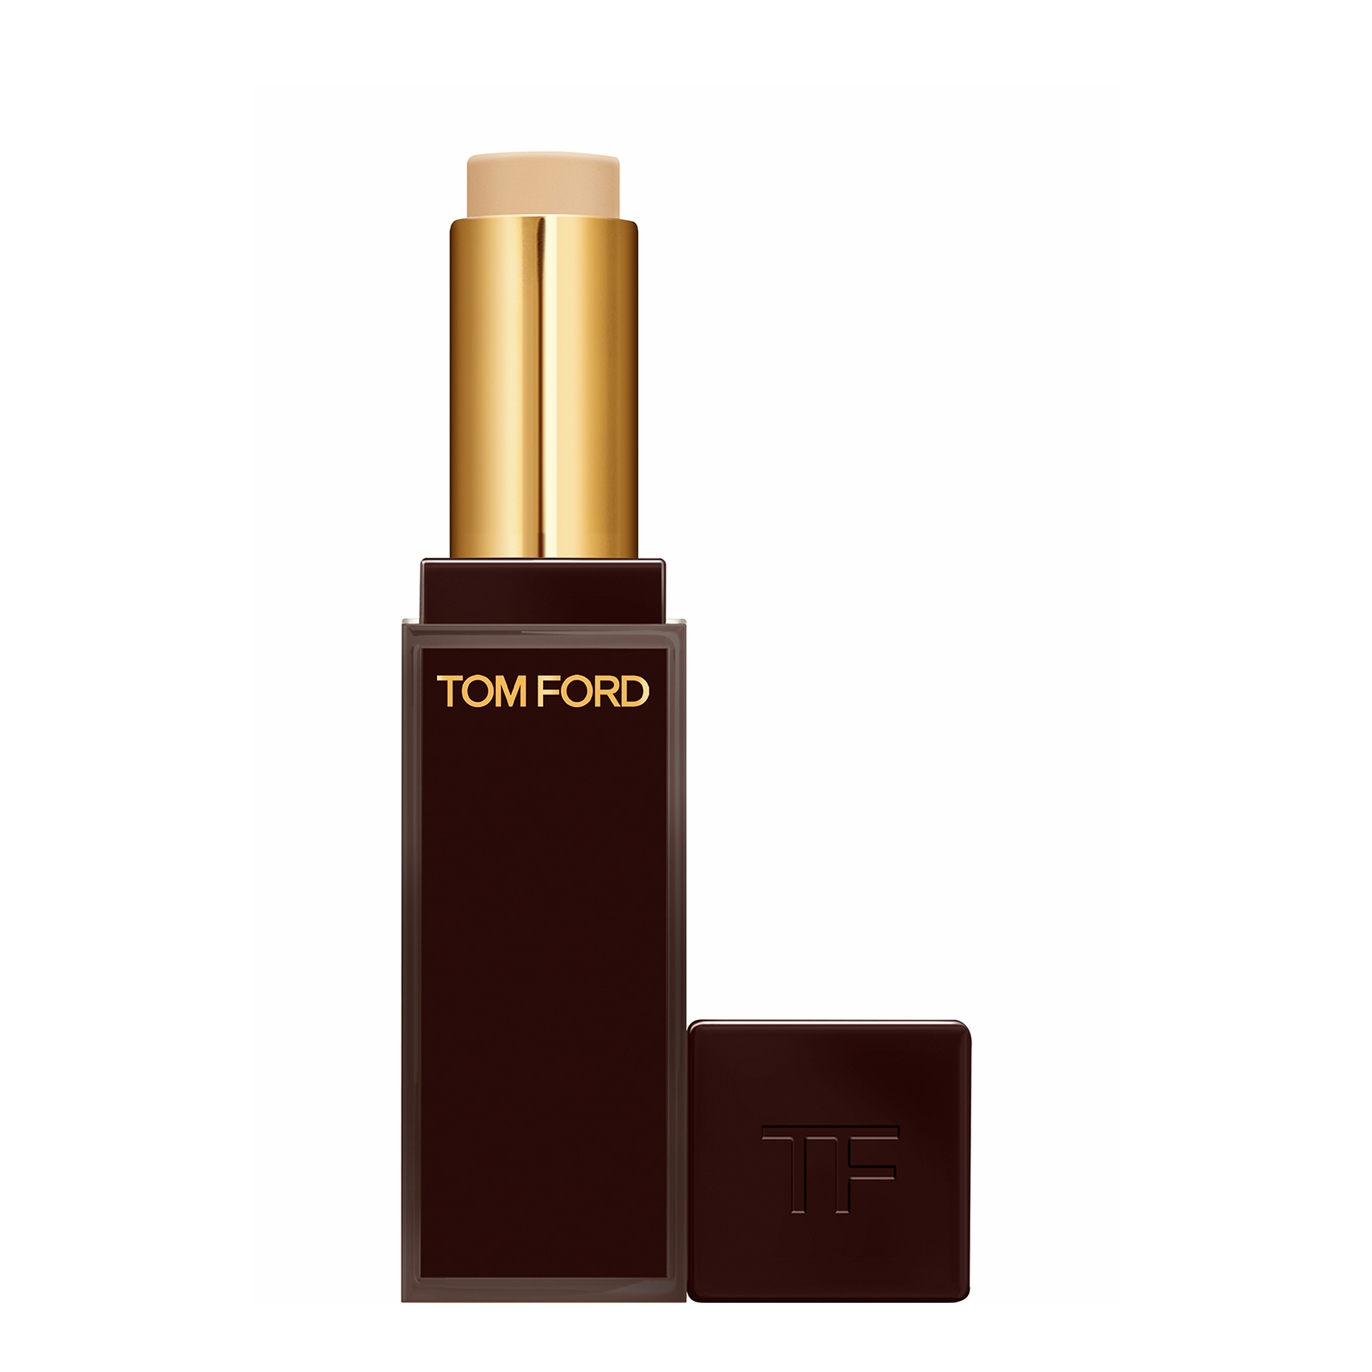 Tom Ford Traceless Soft Matte Concealer - Colour 2w1 Taupe